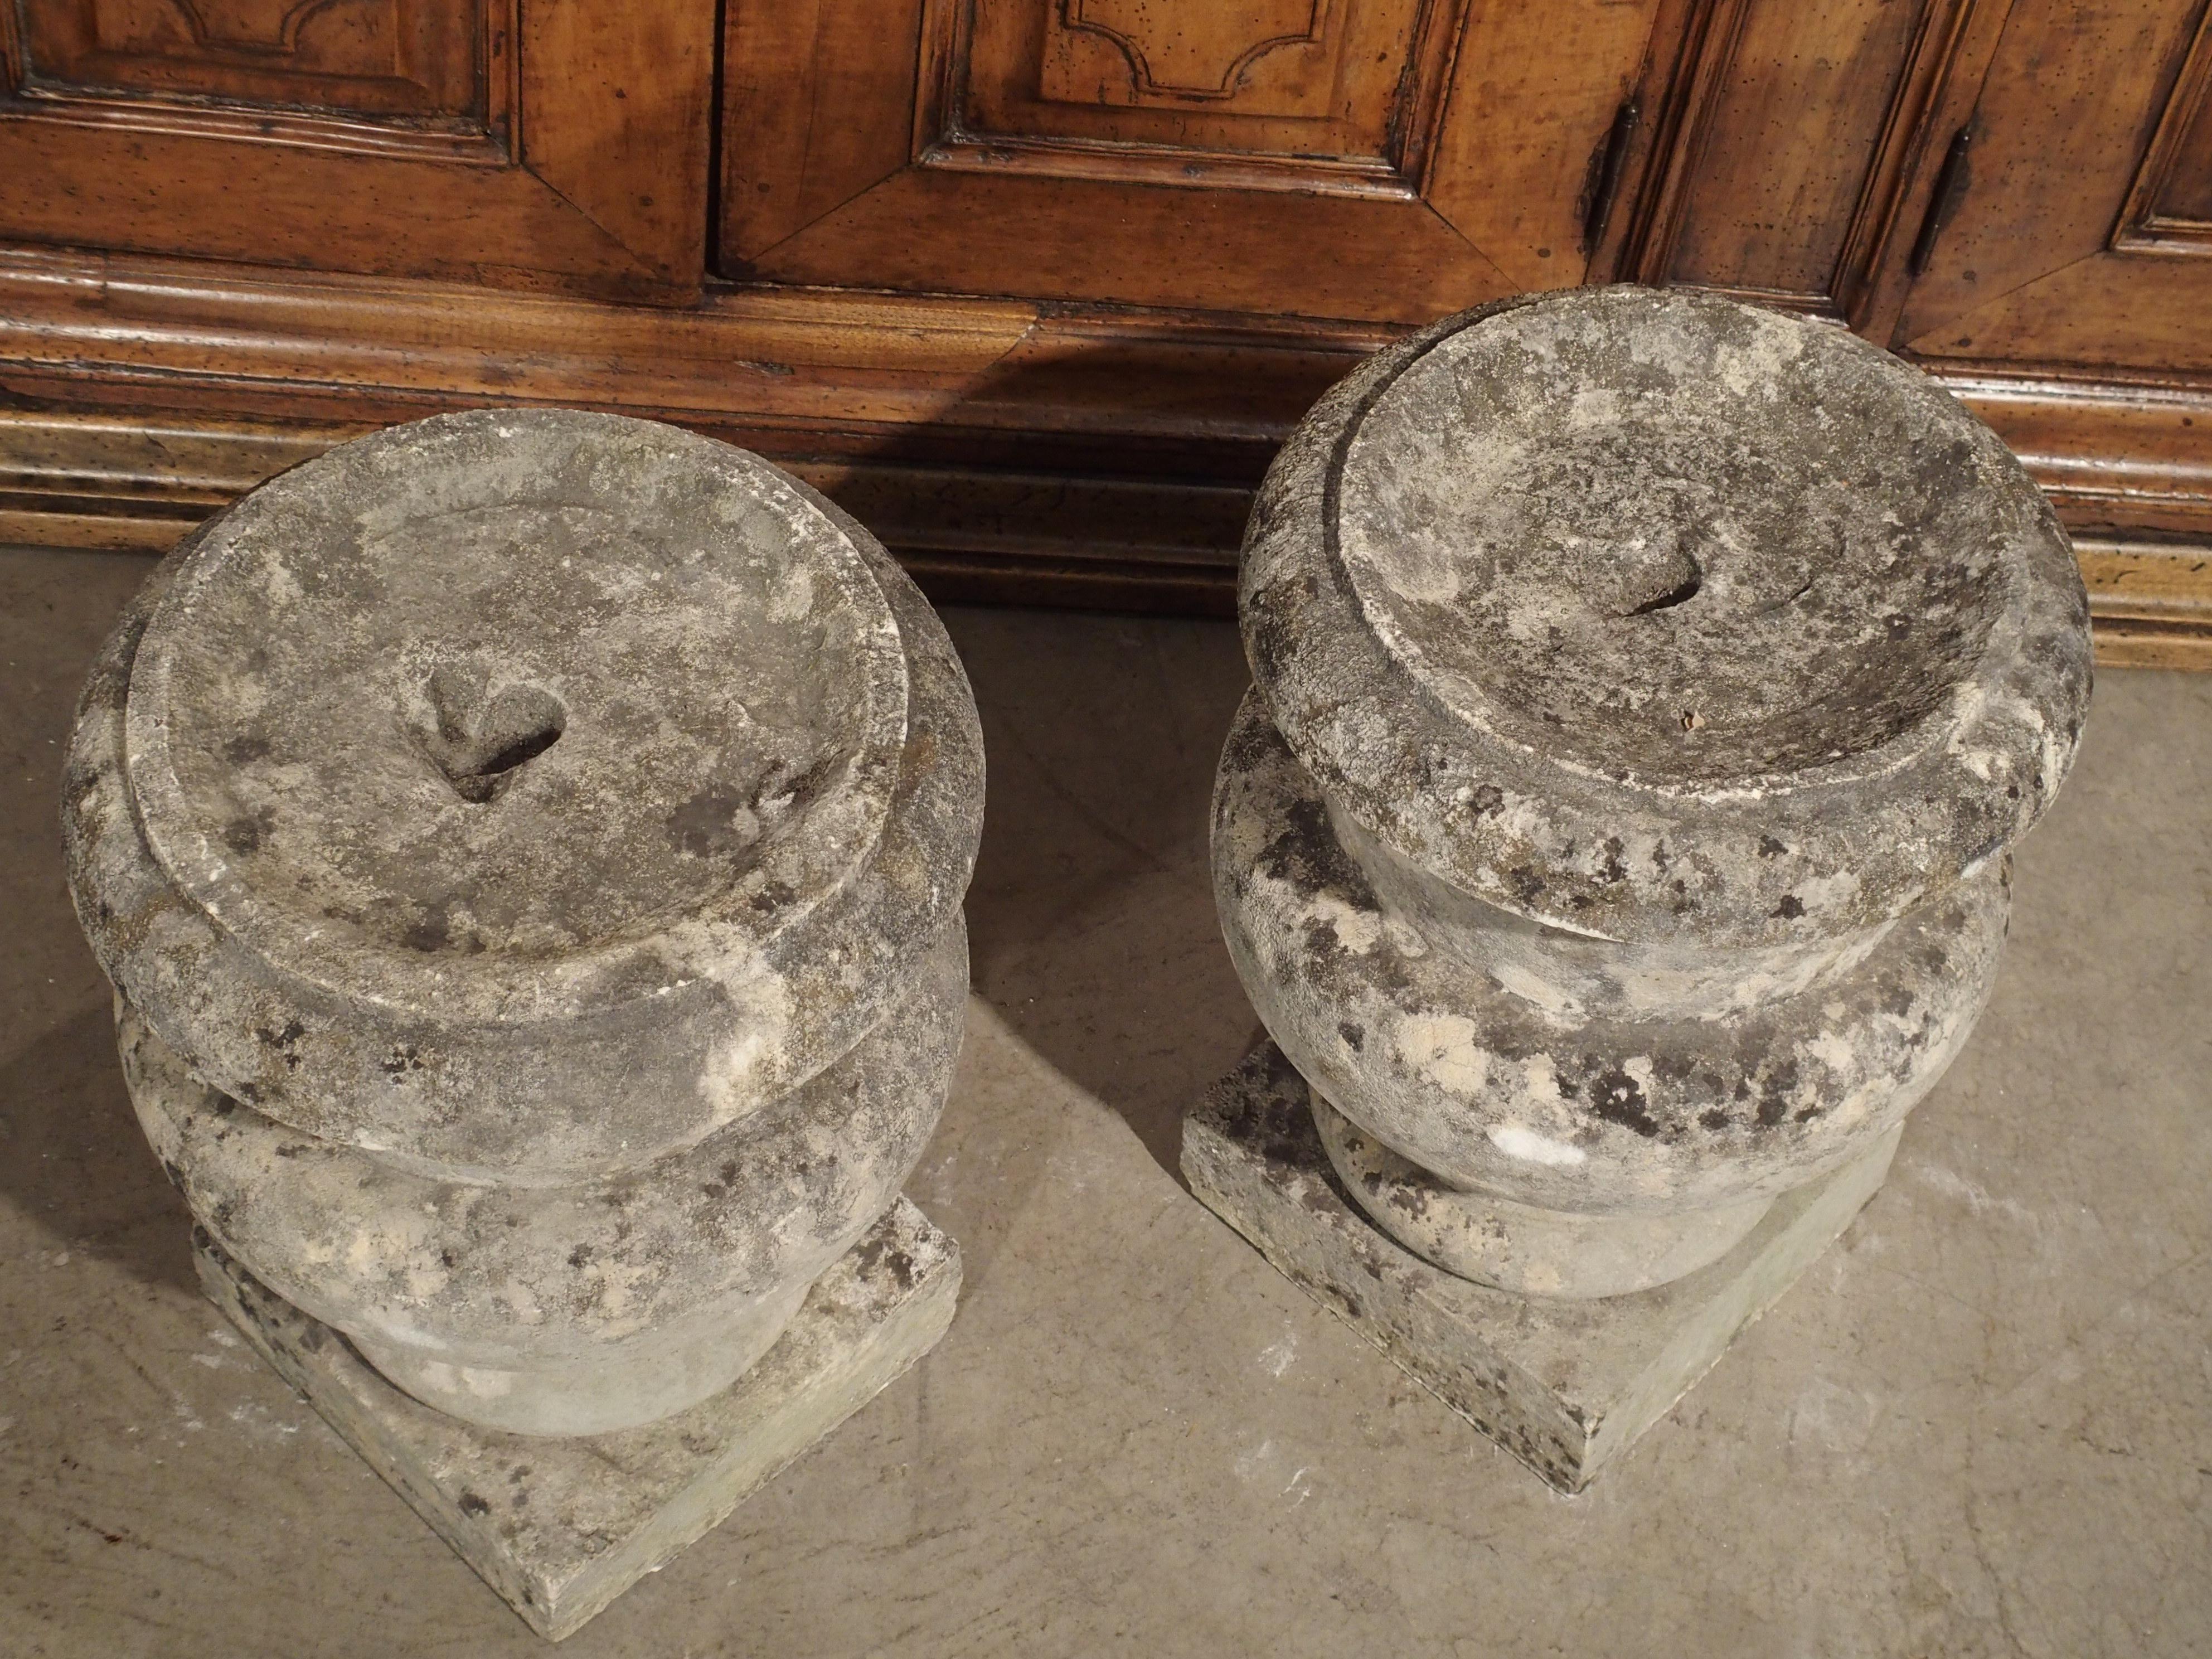 This wonderful pair of antique hand carved urn shaped finials came from a property near Bordeaux, France (second pair available, please inquire if interested). Each has some sort of small mounting hole on the top, which might have held an iron